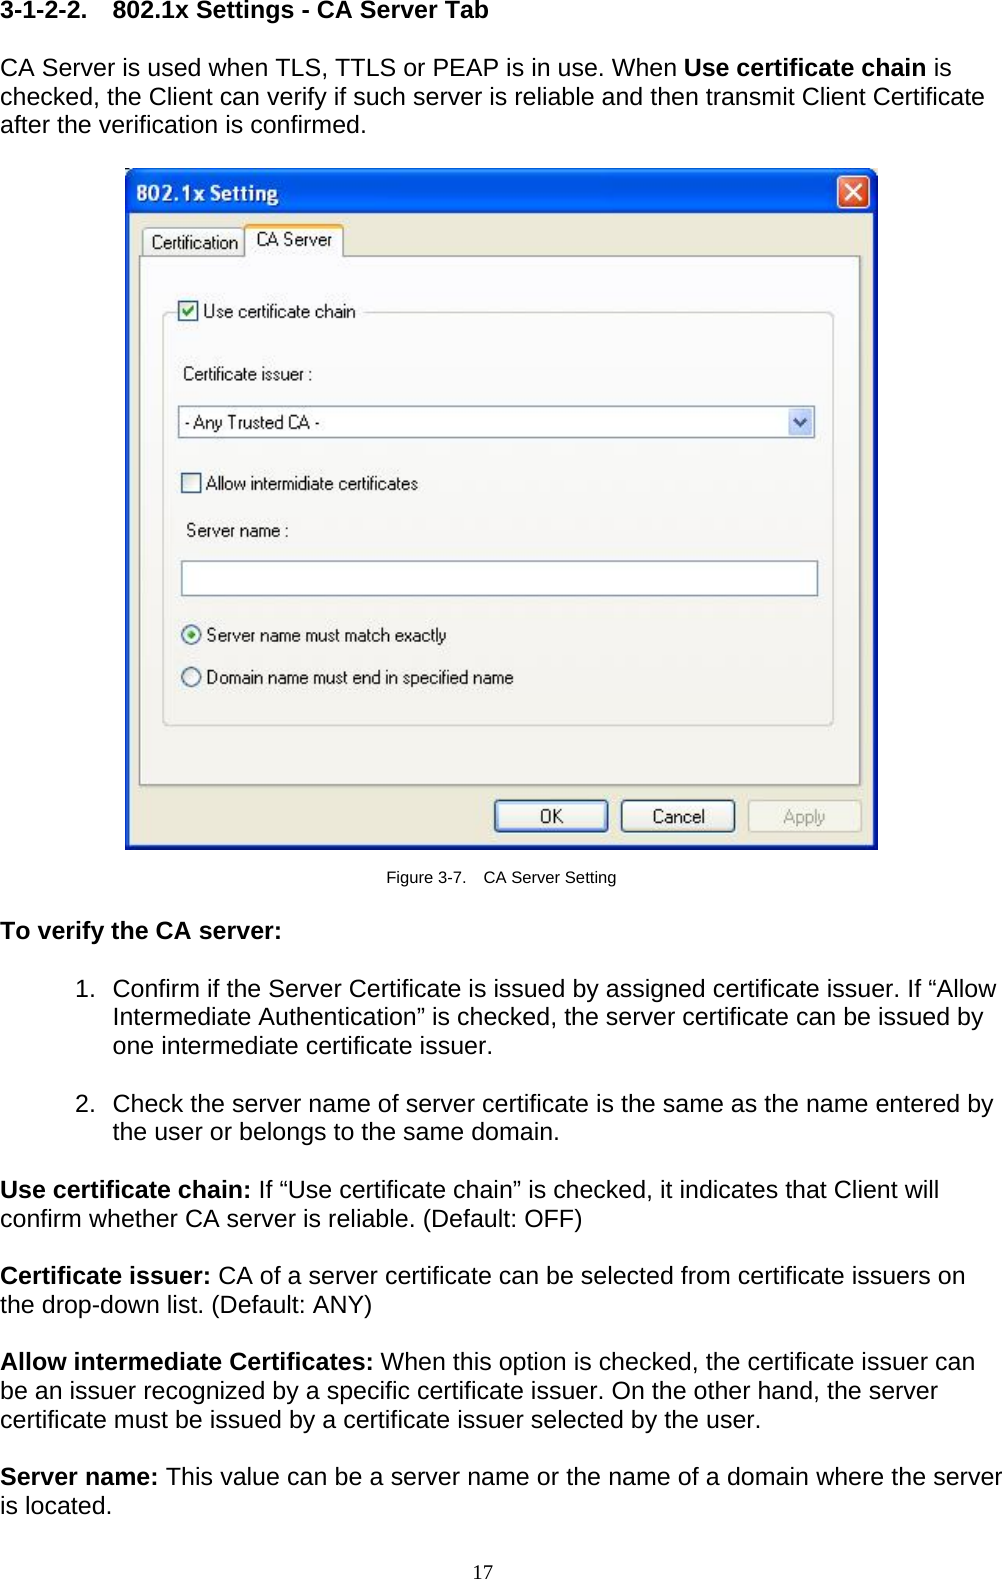 17   3-1-2-2. 802.1x Settings - CA Server Tab  CA Server is used when TLS, TTLS or PEAP is in use. When Use certificate chain is checked, the Client can verify if such server is reliable and then transmit Client Certificate after the verification is confirmed.      Figure 3-7.    CA Server Setting  To verify the CA server:  1.  Confirm if the Server Certificate is issued by assigned certificate issuer. If “Allow Intermediate Authentication” is checked, the server certificate can be issued by one intermediate certificate issuer.  2.  Check the server name of server certificate is the same as the name entered by the user or belongs to the same domain.  Use certificate chain: If “Use certificate chain” is checked, it indicates that Client will confirm whether CA server is reliable. (Default: OFF)  Certificate issuer: CA of a server certificate can be selected from certificate issuers on the drop-down list. (Default: ANY)  Allow intermediate Certificates: When this option is checked, the certificate issuer can be an issuer recognized by a specific certificate issuer. On the other hand, the server certificate must be issued by a certificate issuer selected by the user.  Server name: This value can be a server name or the name of a domain where the server is located. 